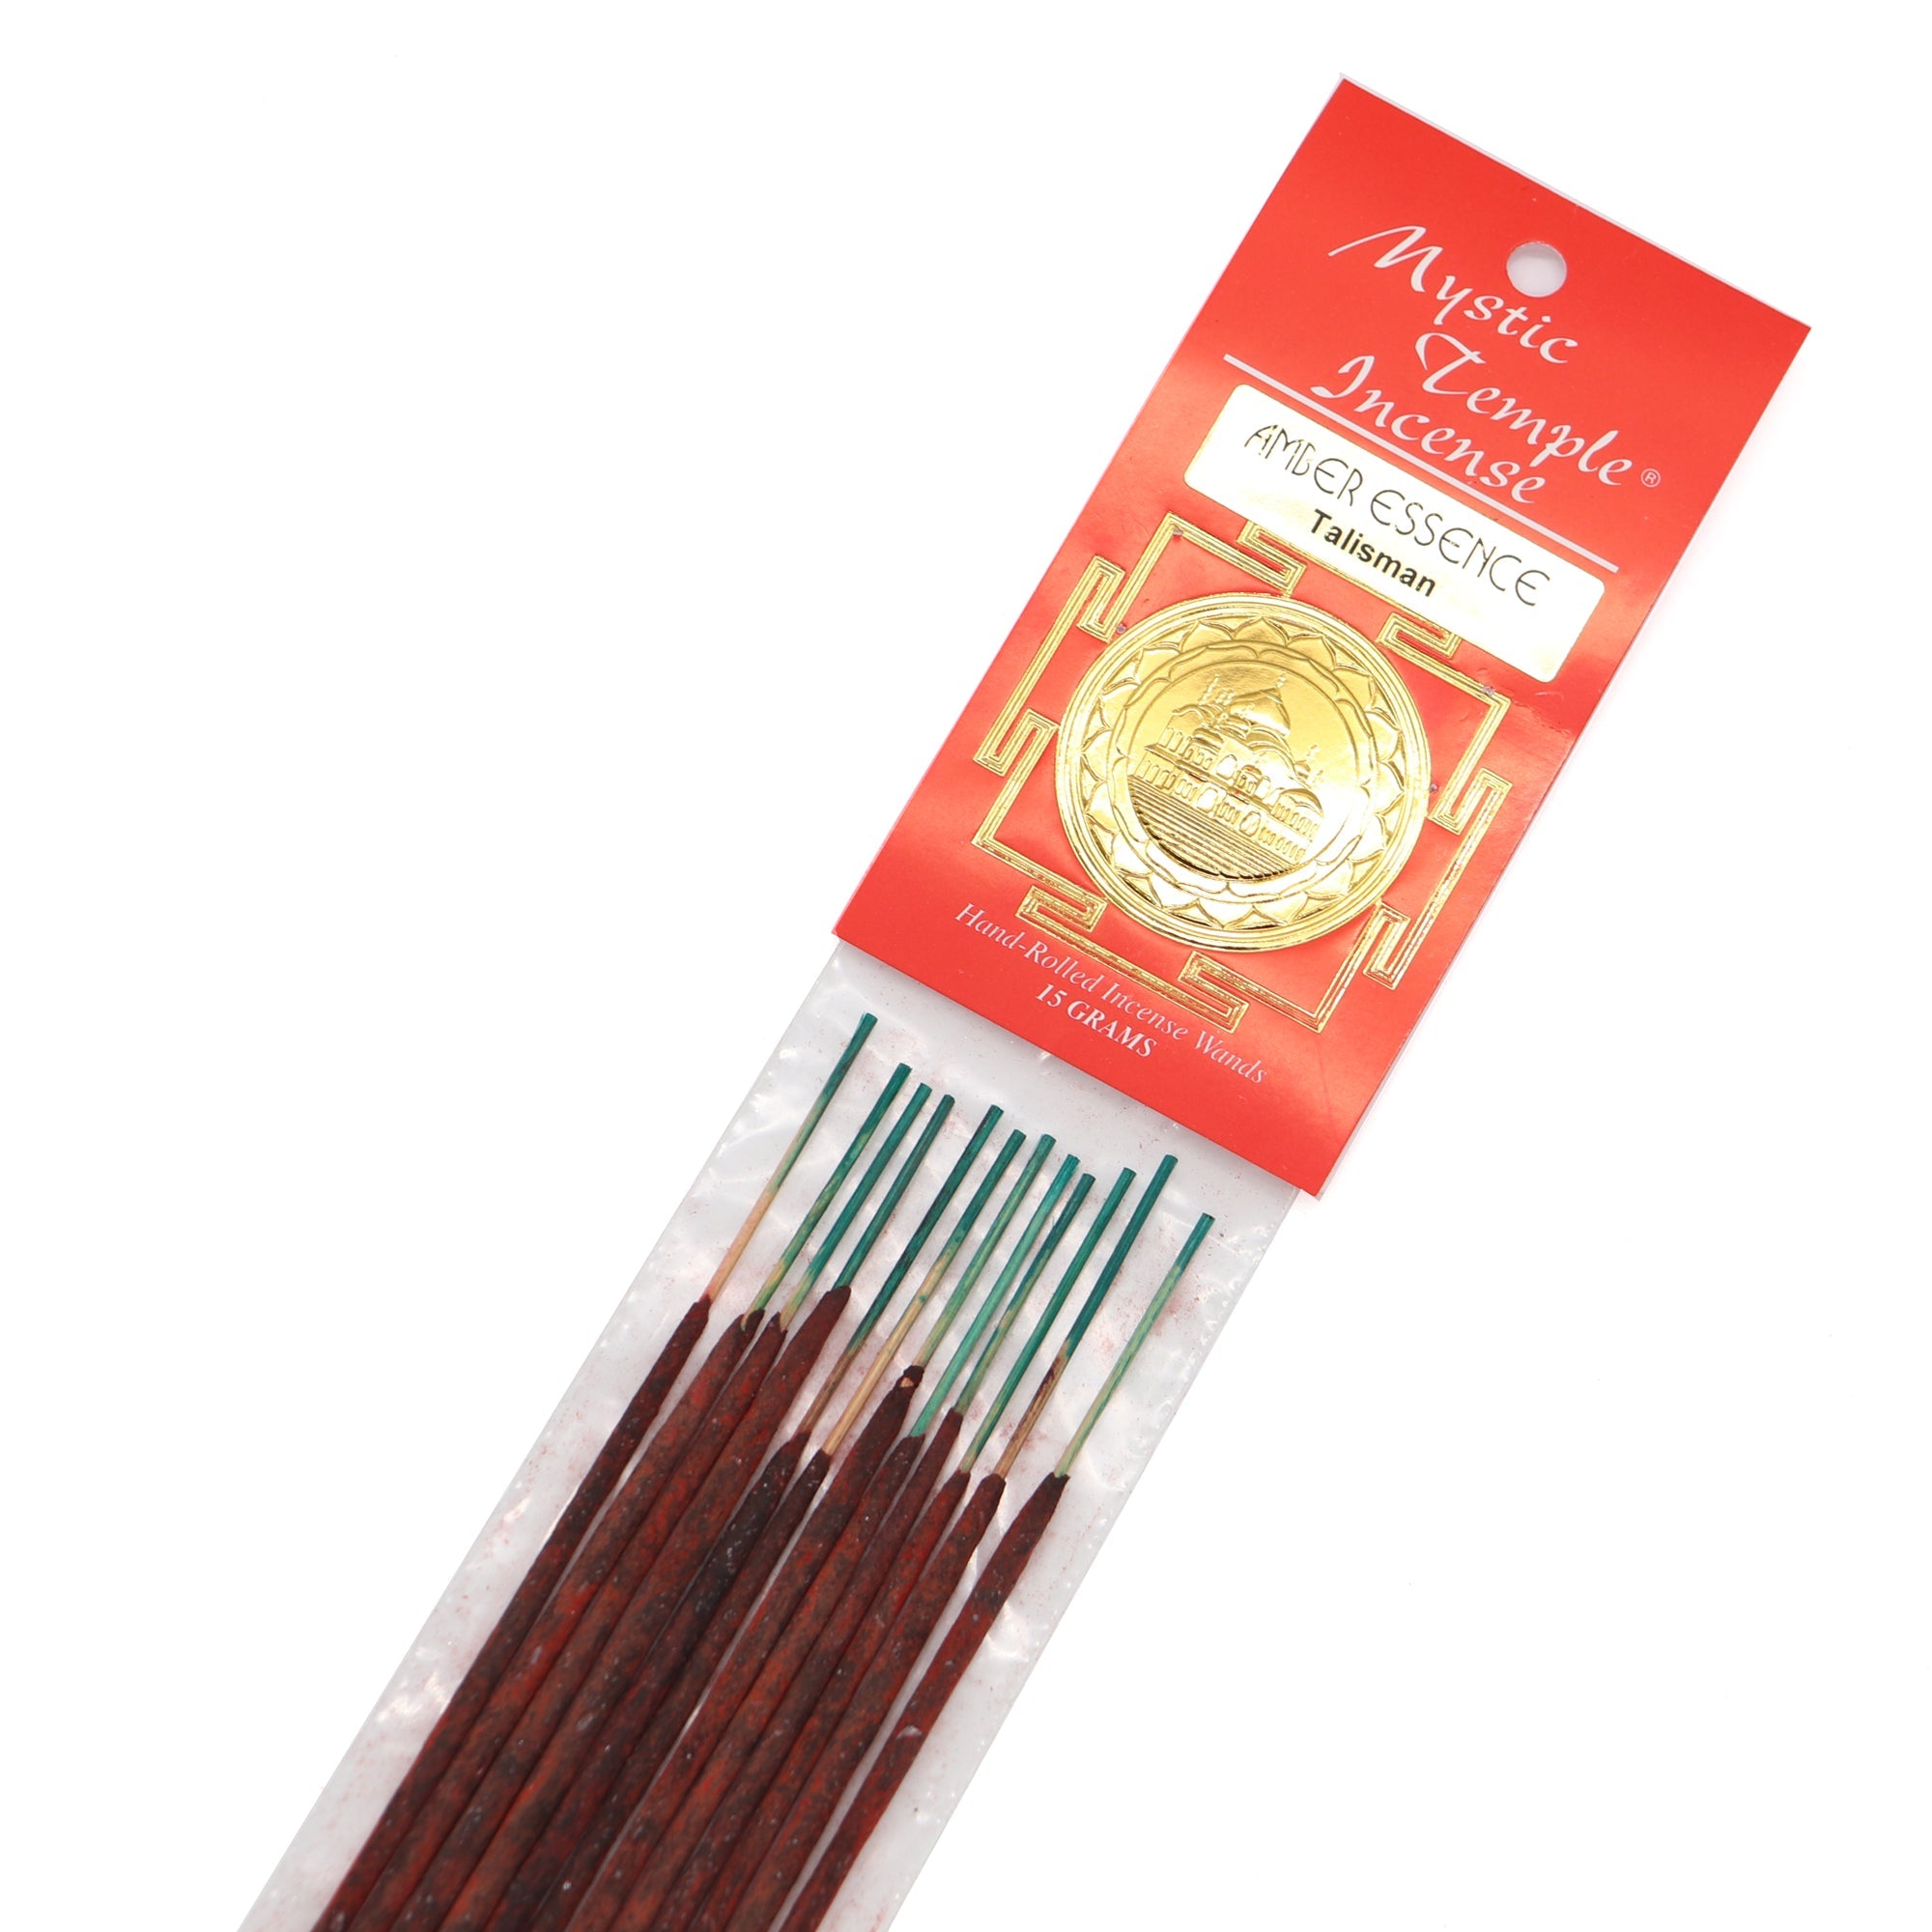 Amber Essence Incense - 13 Moons